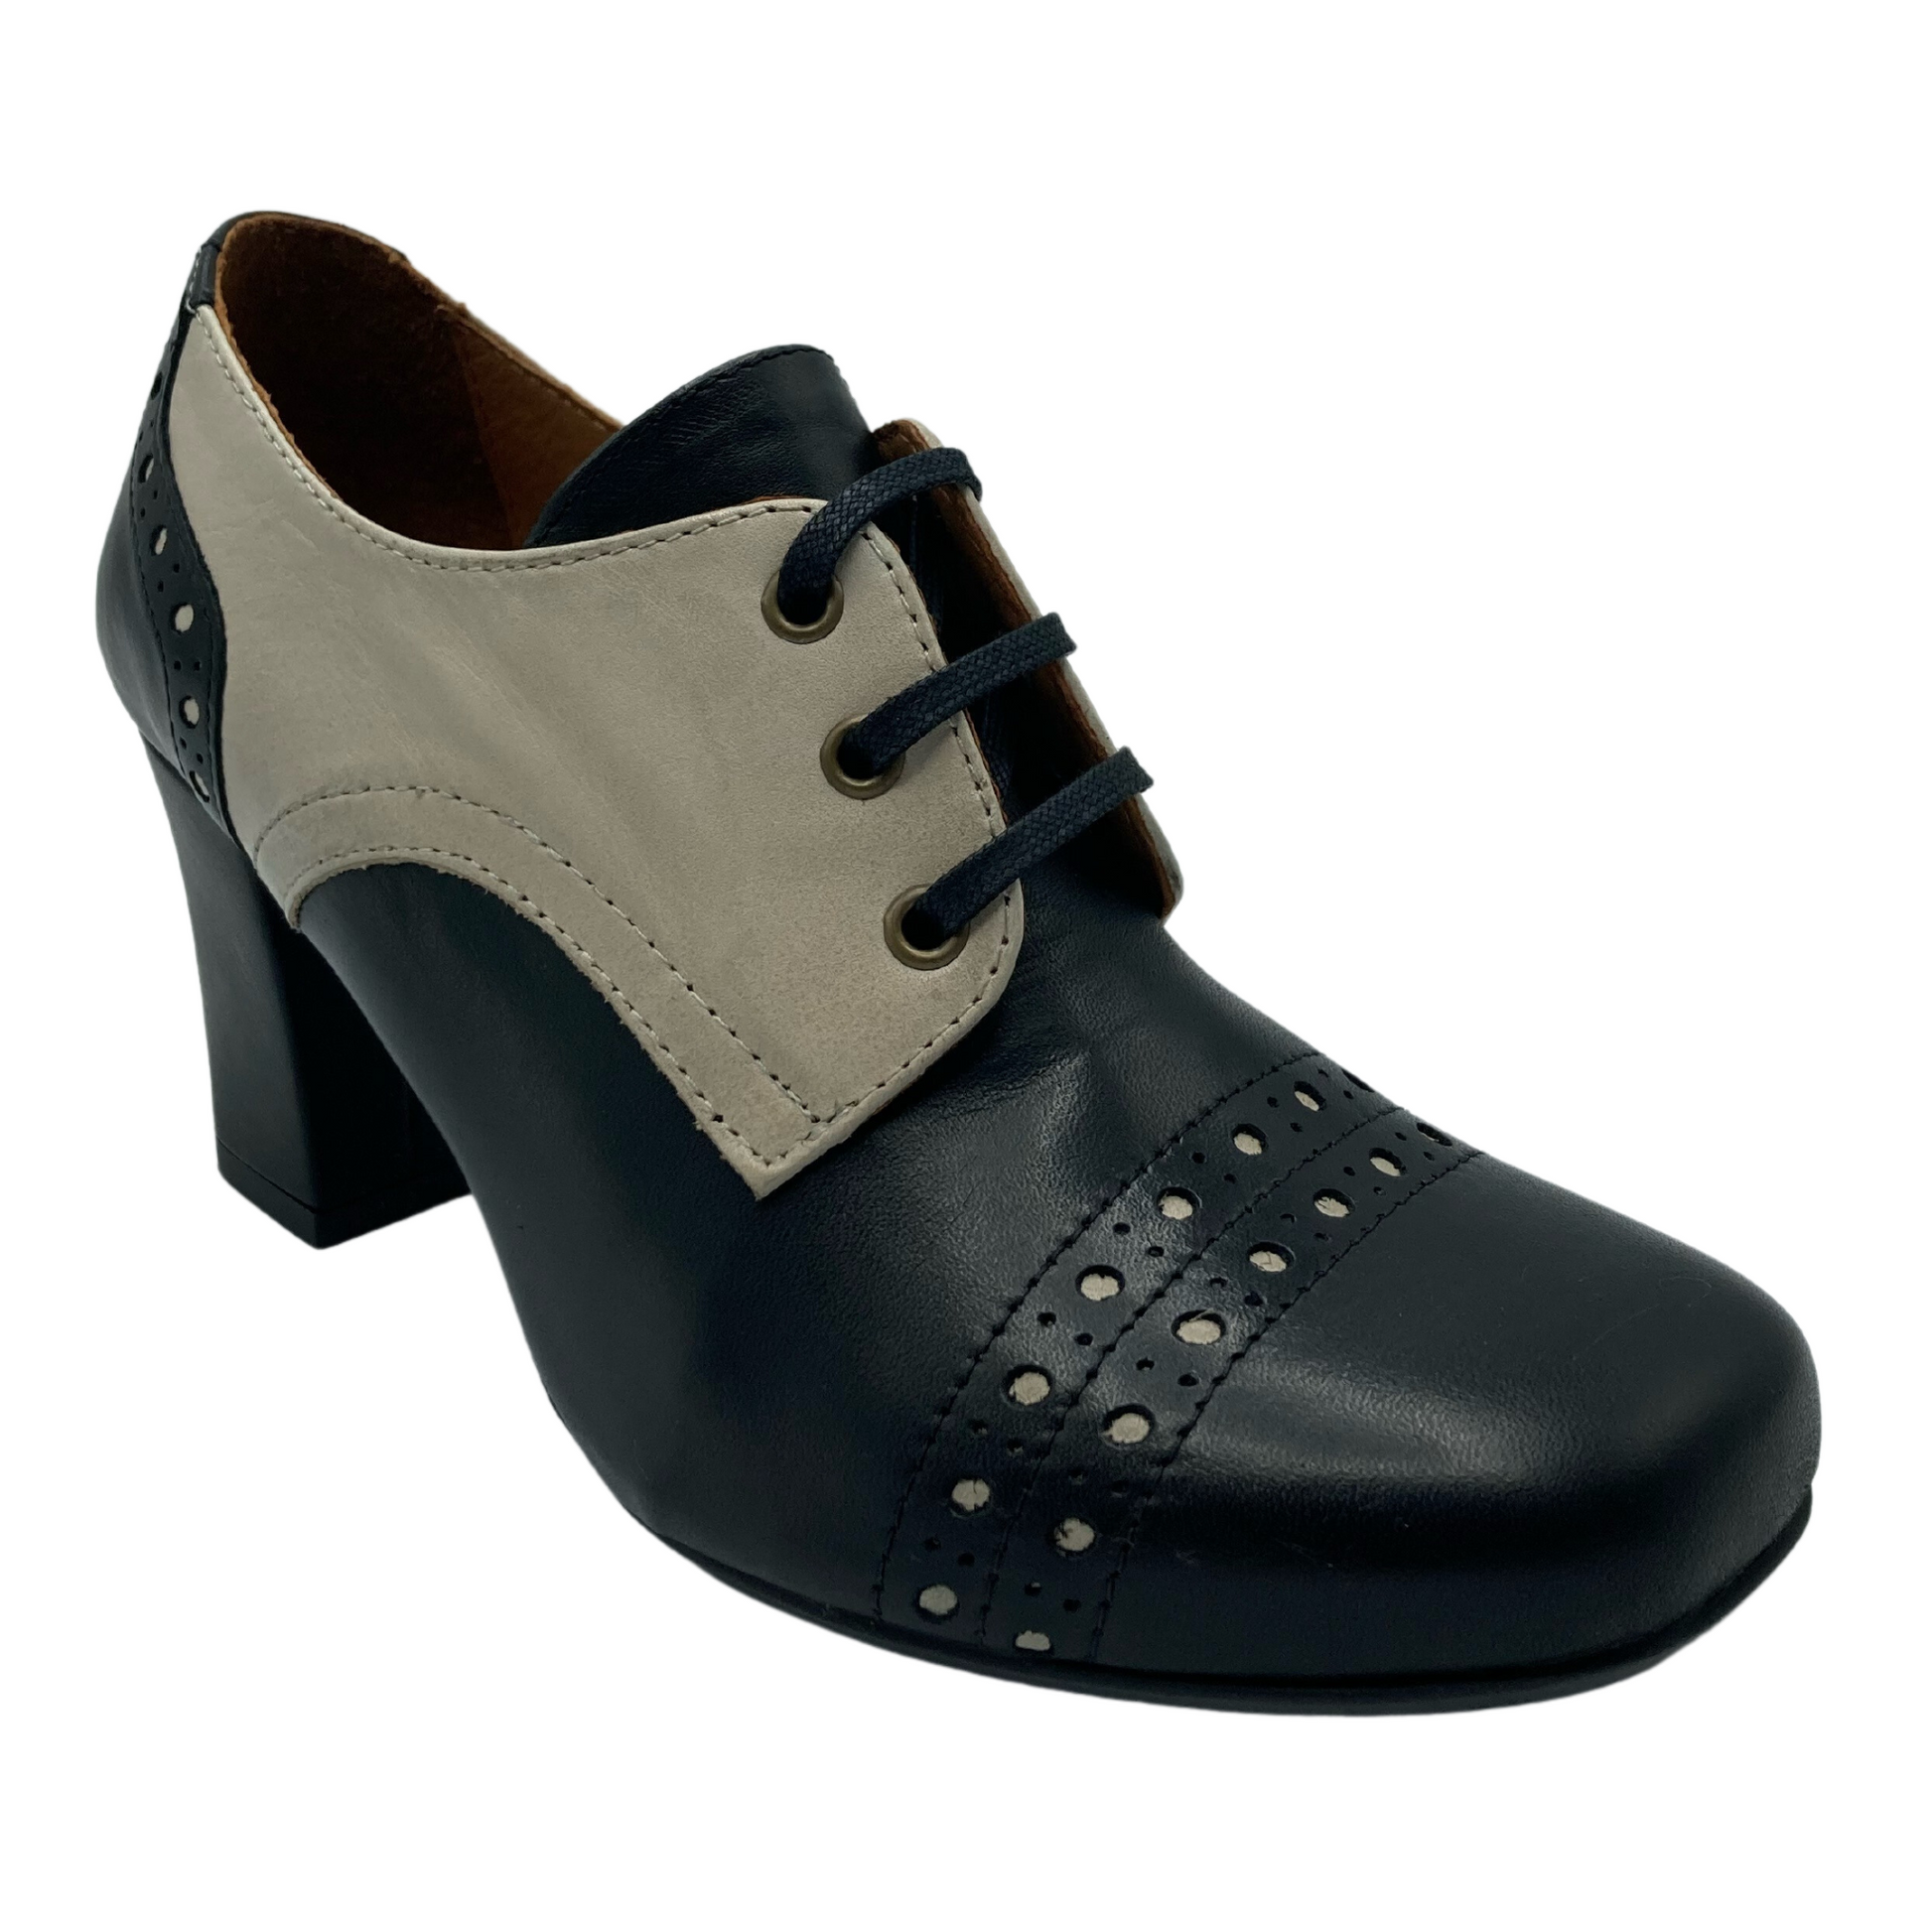 45 degree angled view of leather oxford with block heel and black laces